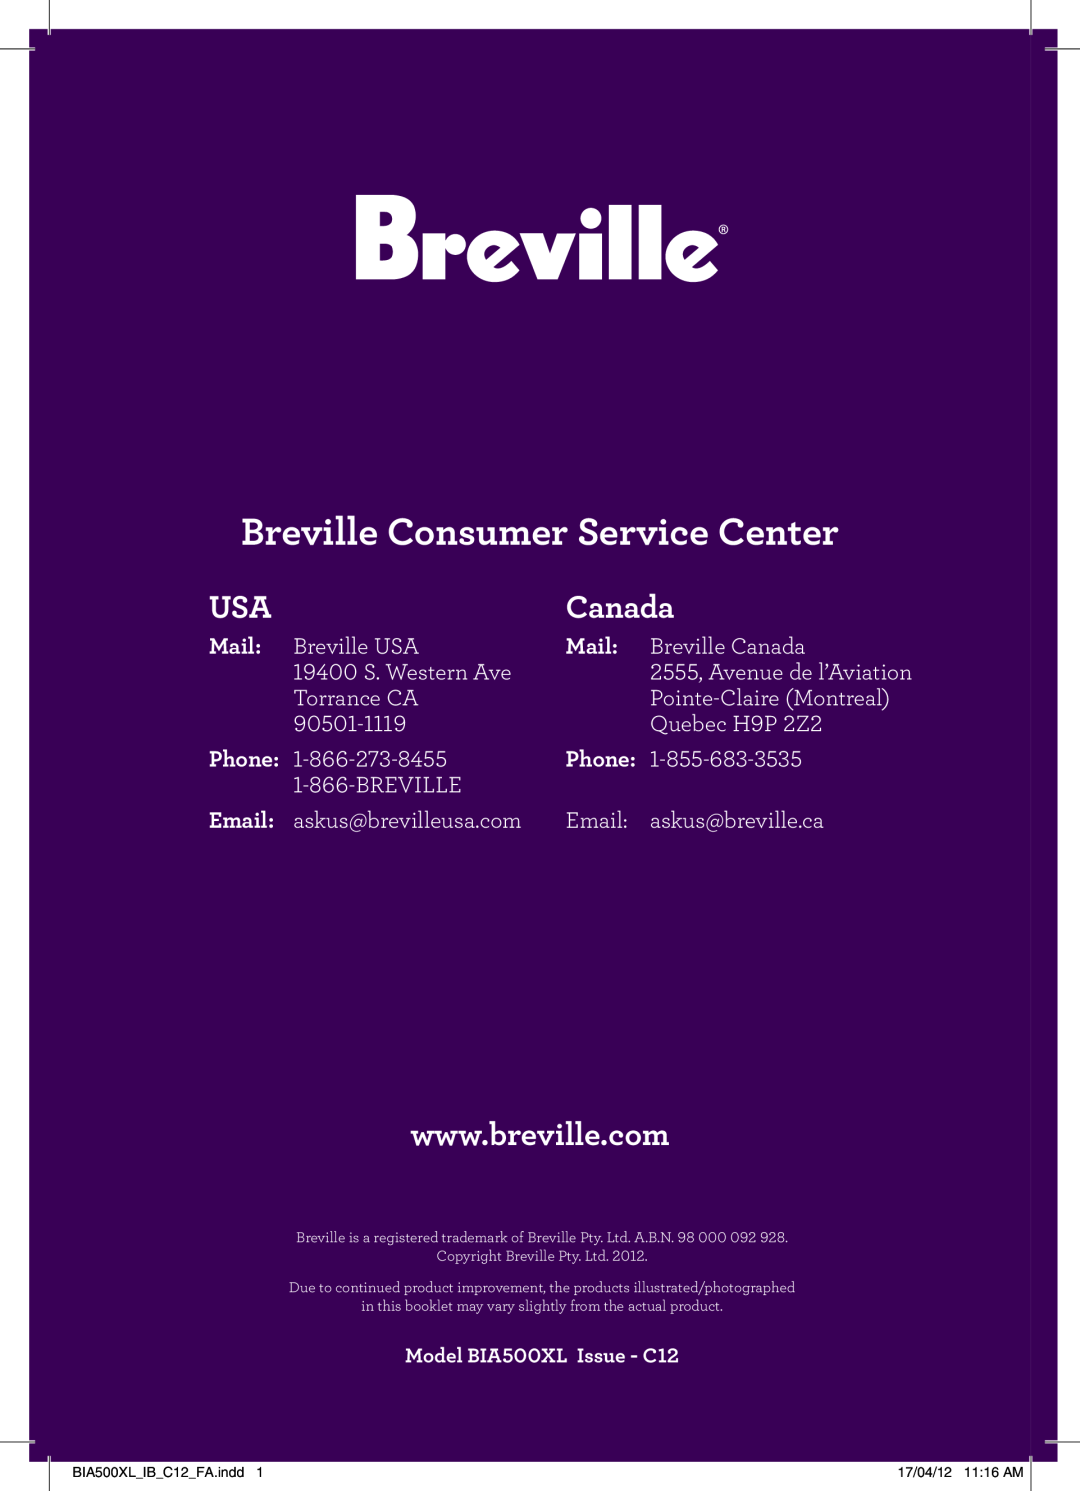 Breville BIA500XL manual Mail, Phone, Email, Breville Consumer Service Center, Canada 